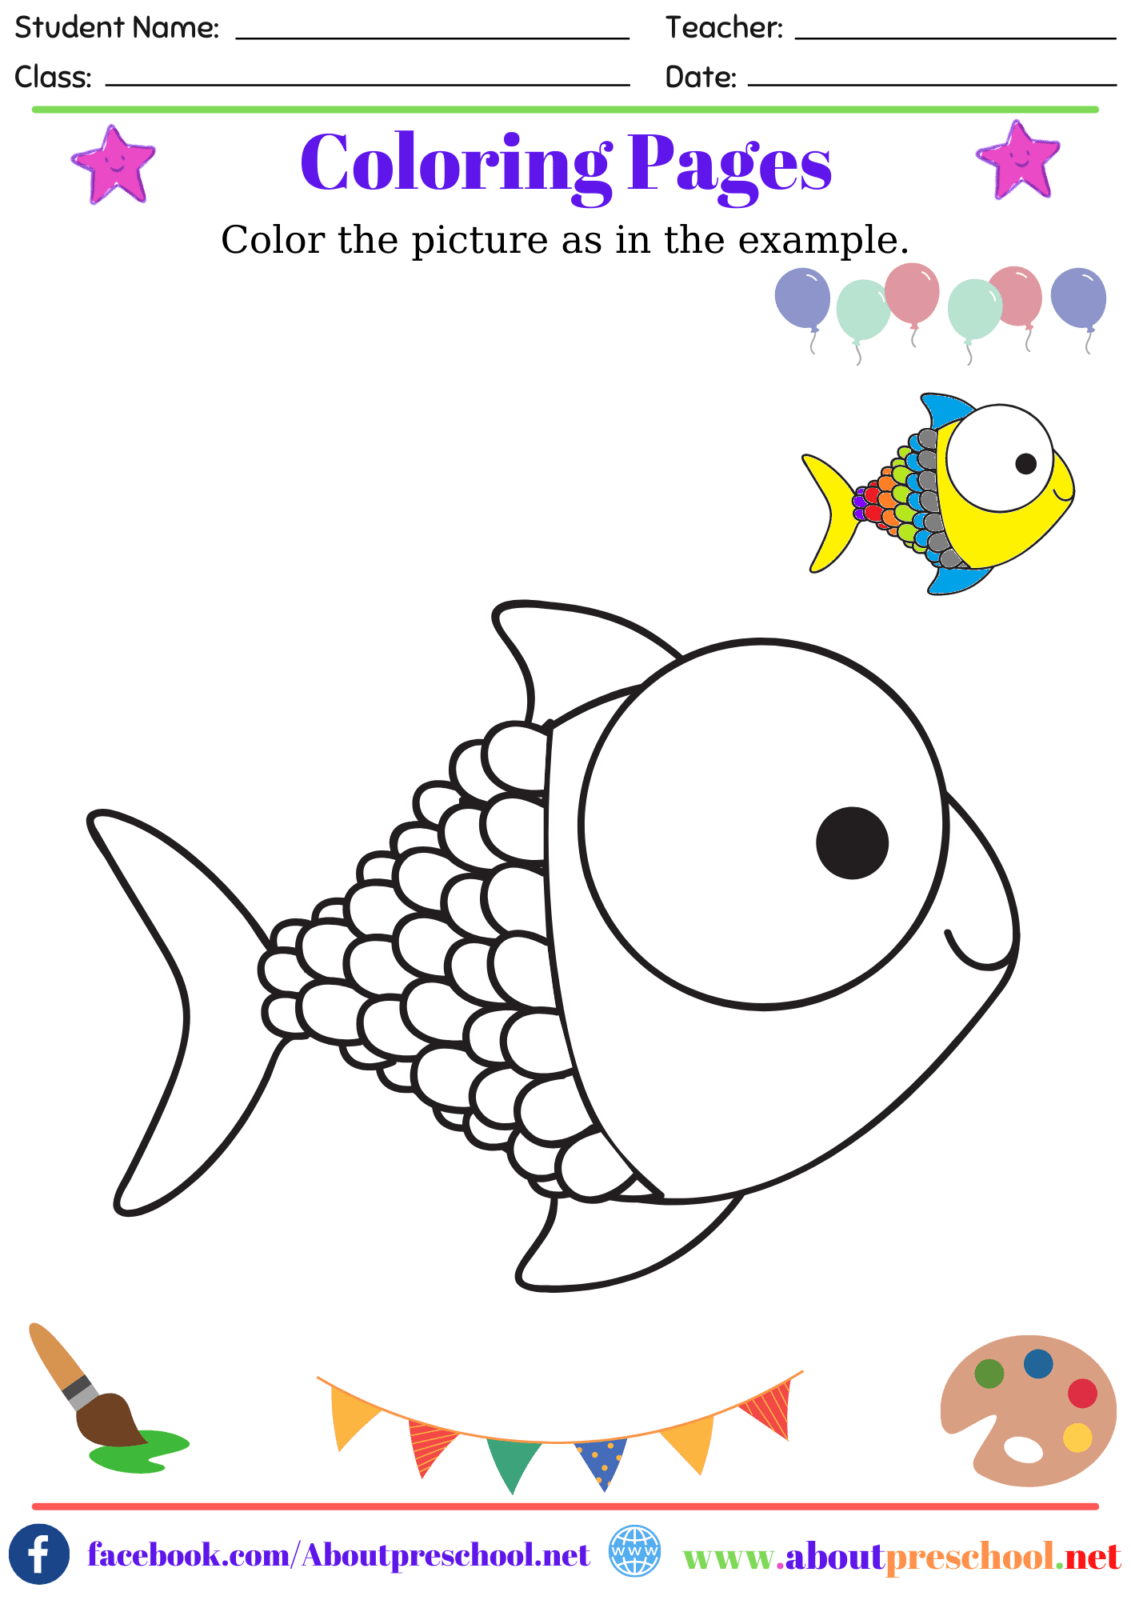 Coloring Pages-16